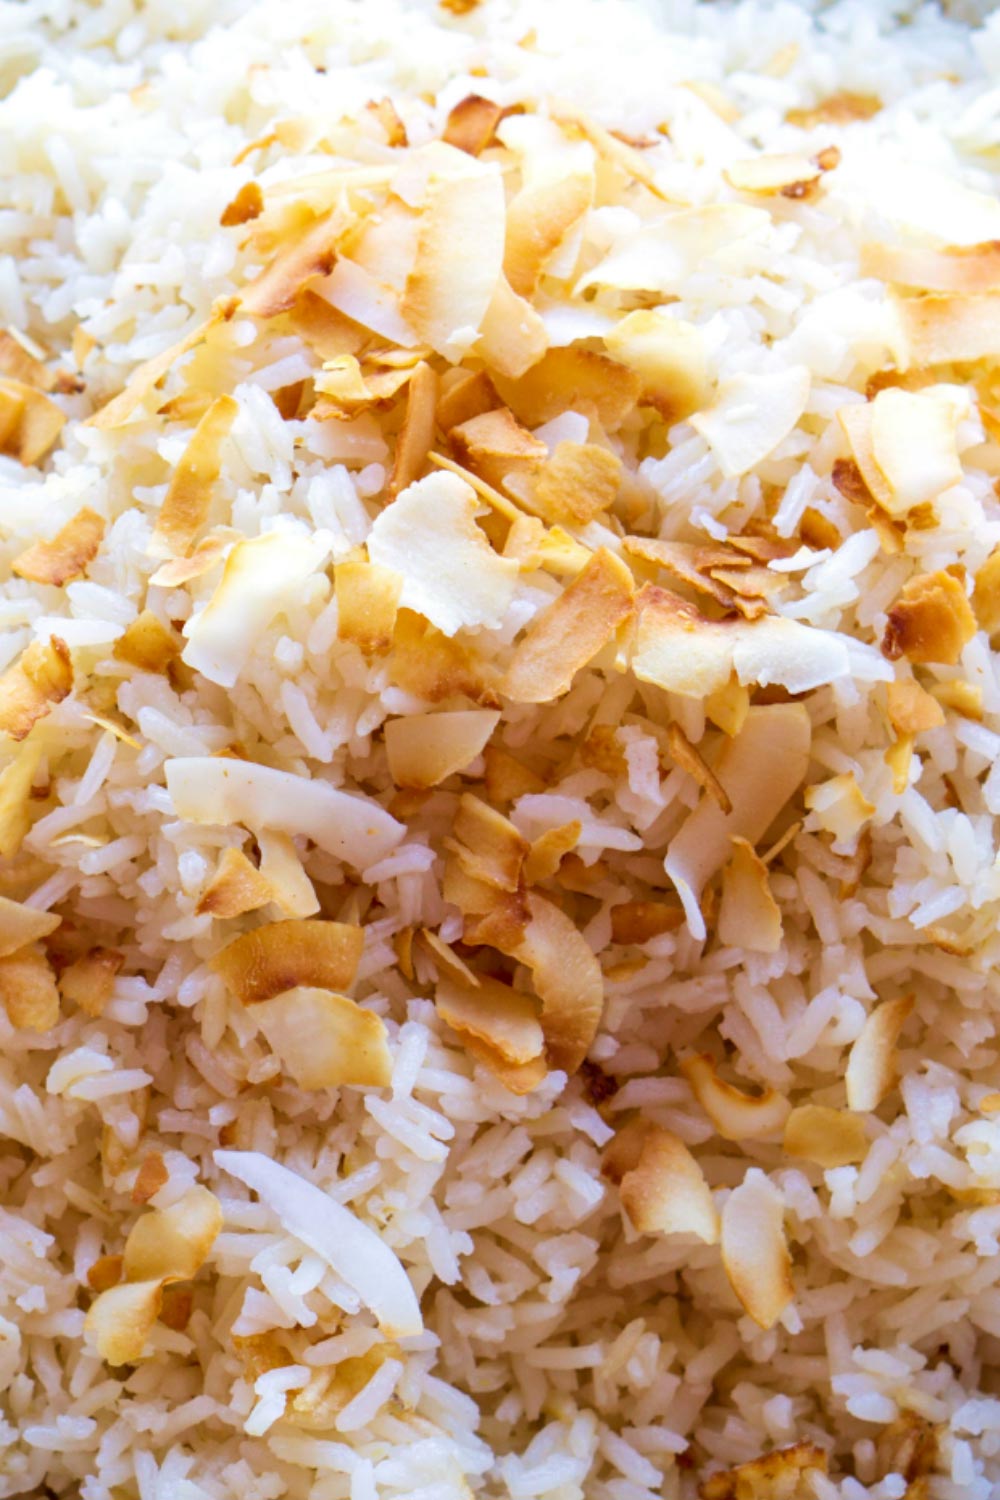 My favorite Coconut Rice recipe! It comes out perfectly every time!